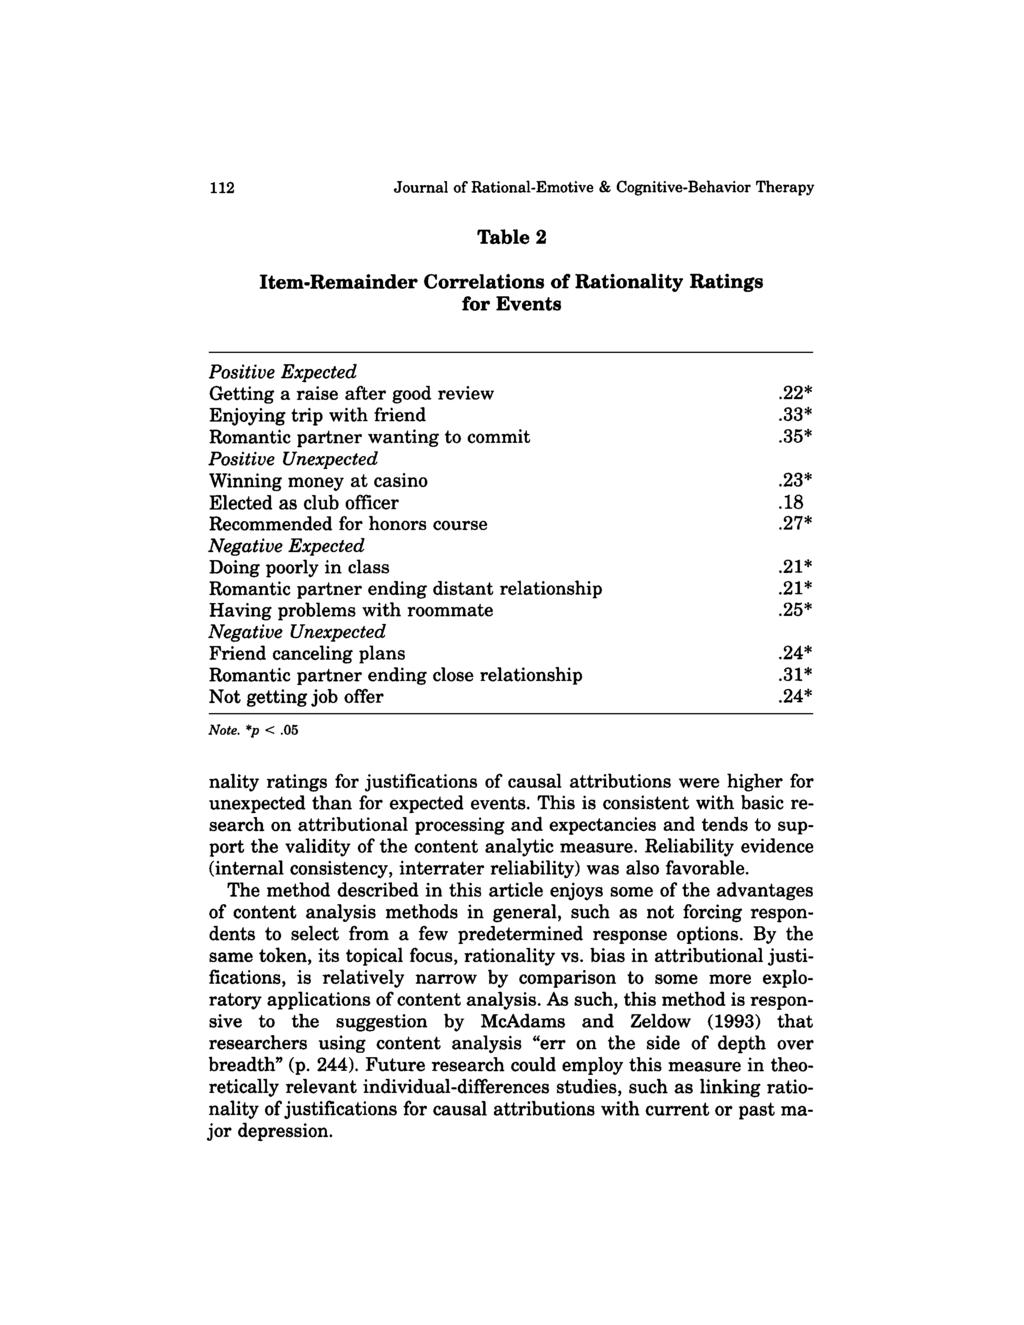 112 Journal of Rational-Emotive & Cognitive-Behavior Therapy Table 2 Item-Remainder Correlations of Rationality Ratings for Events Positive Expected Getting a raise after good review Enjoying trip